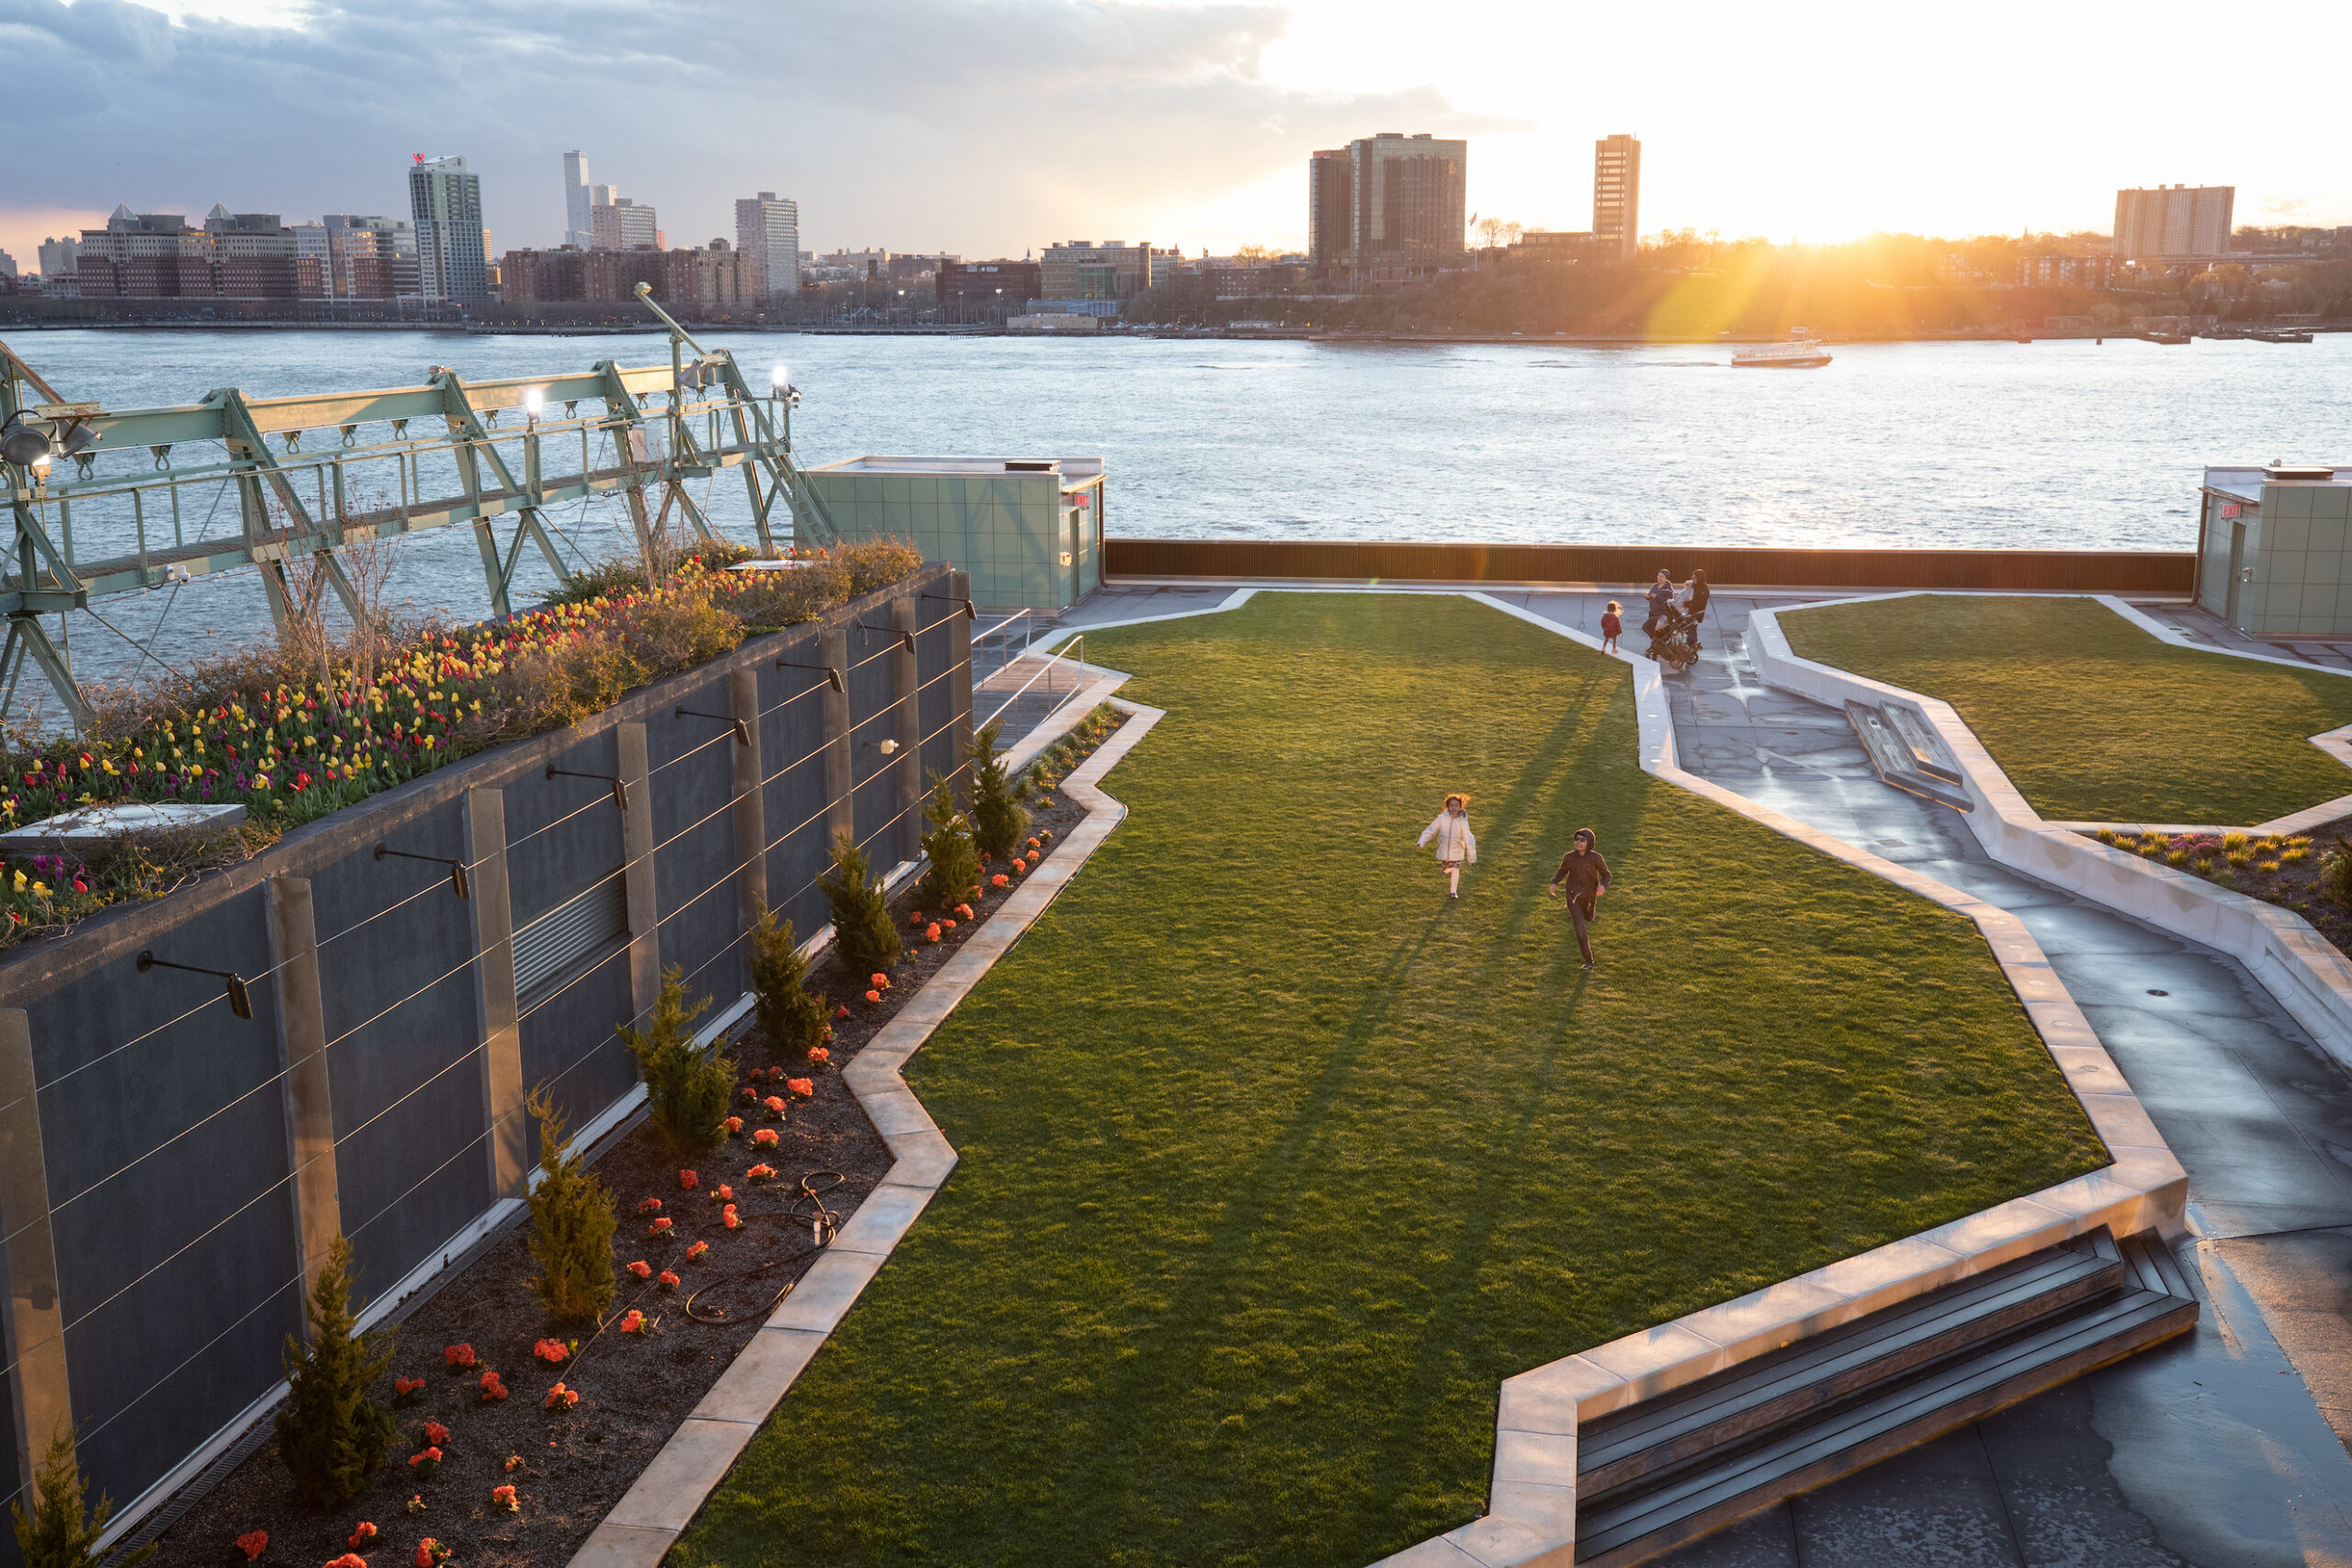 Kids play on the grass at the Pier 57 Rooftop Park at sunset